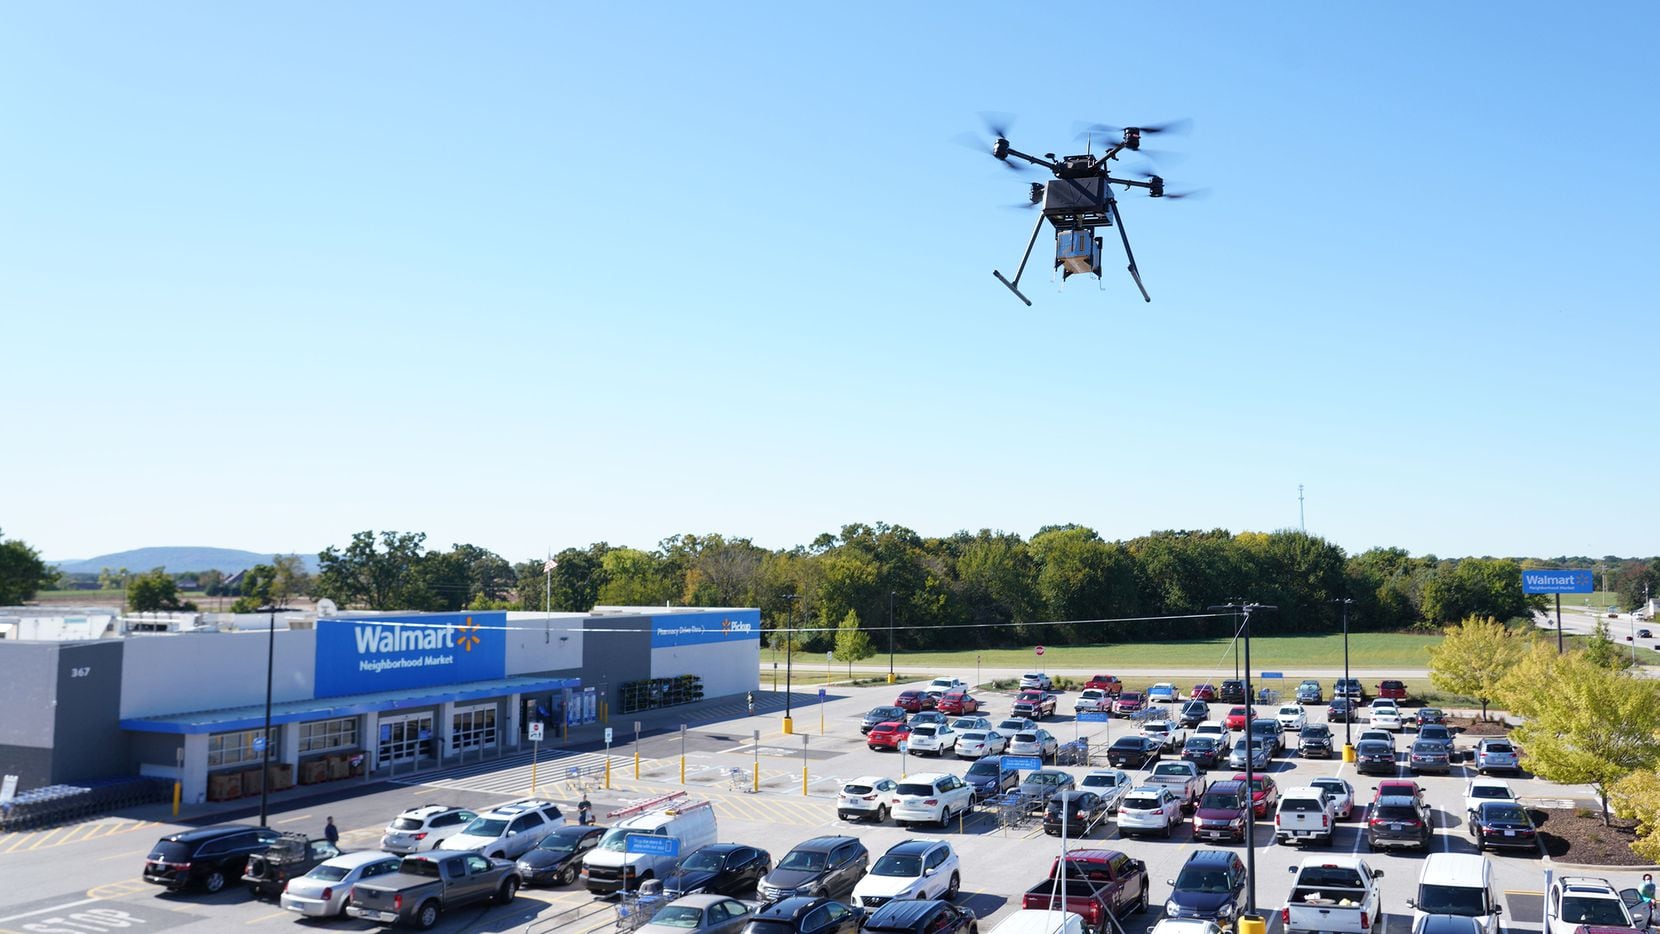 Walmart’s drone delivery takes flight in Texas.